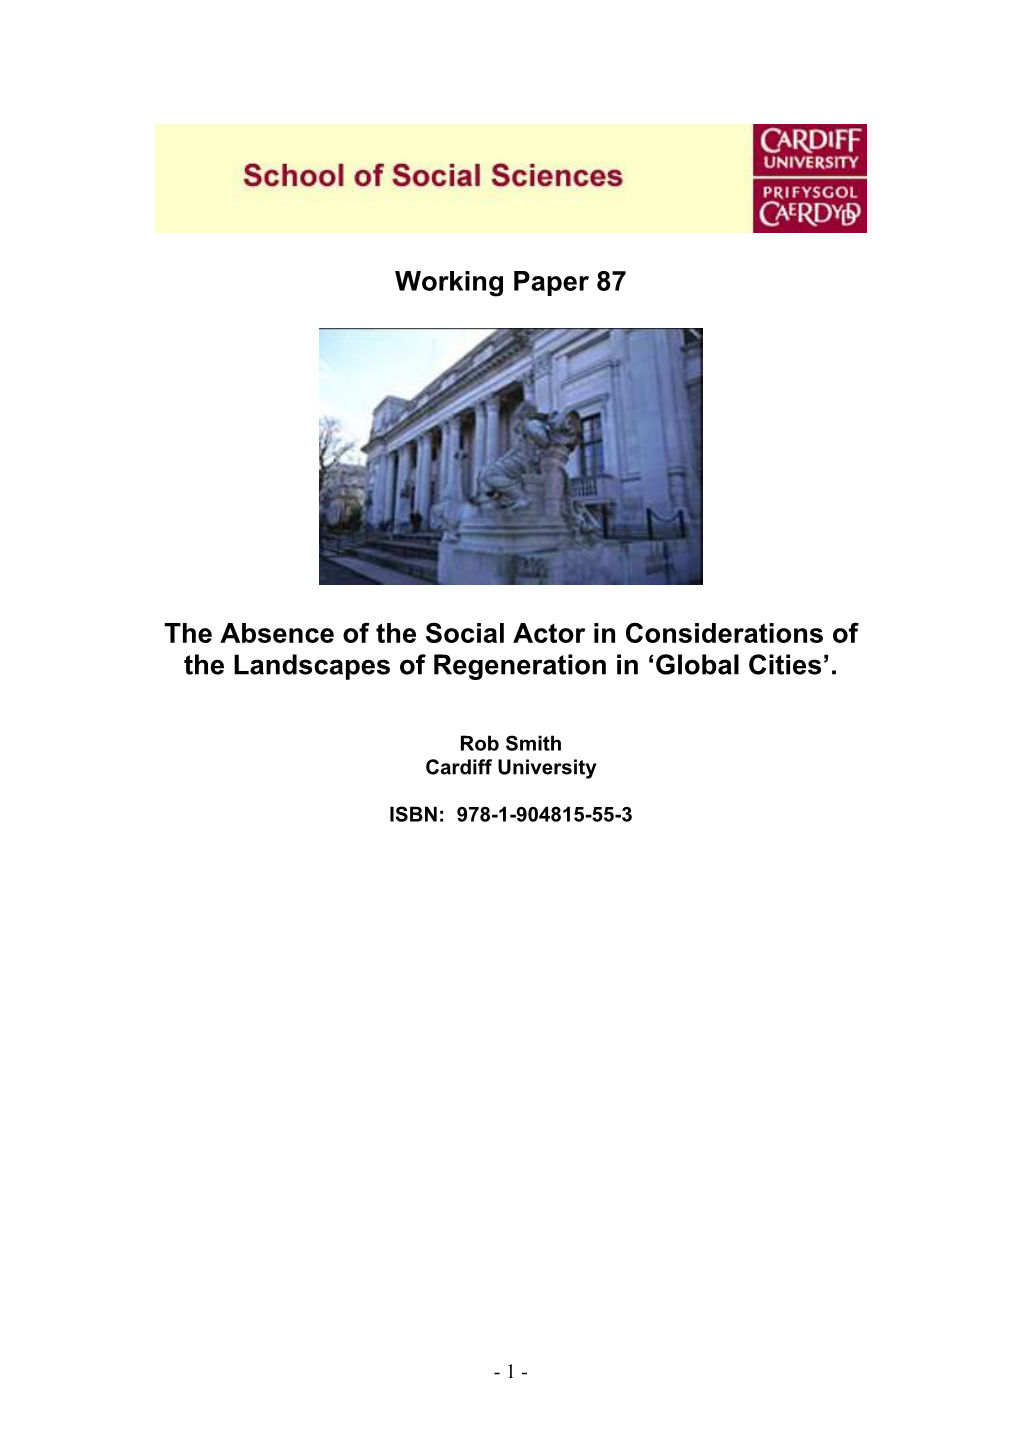 Working Paper 87 the Absence of the Social